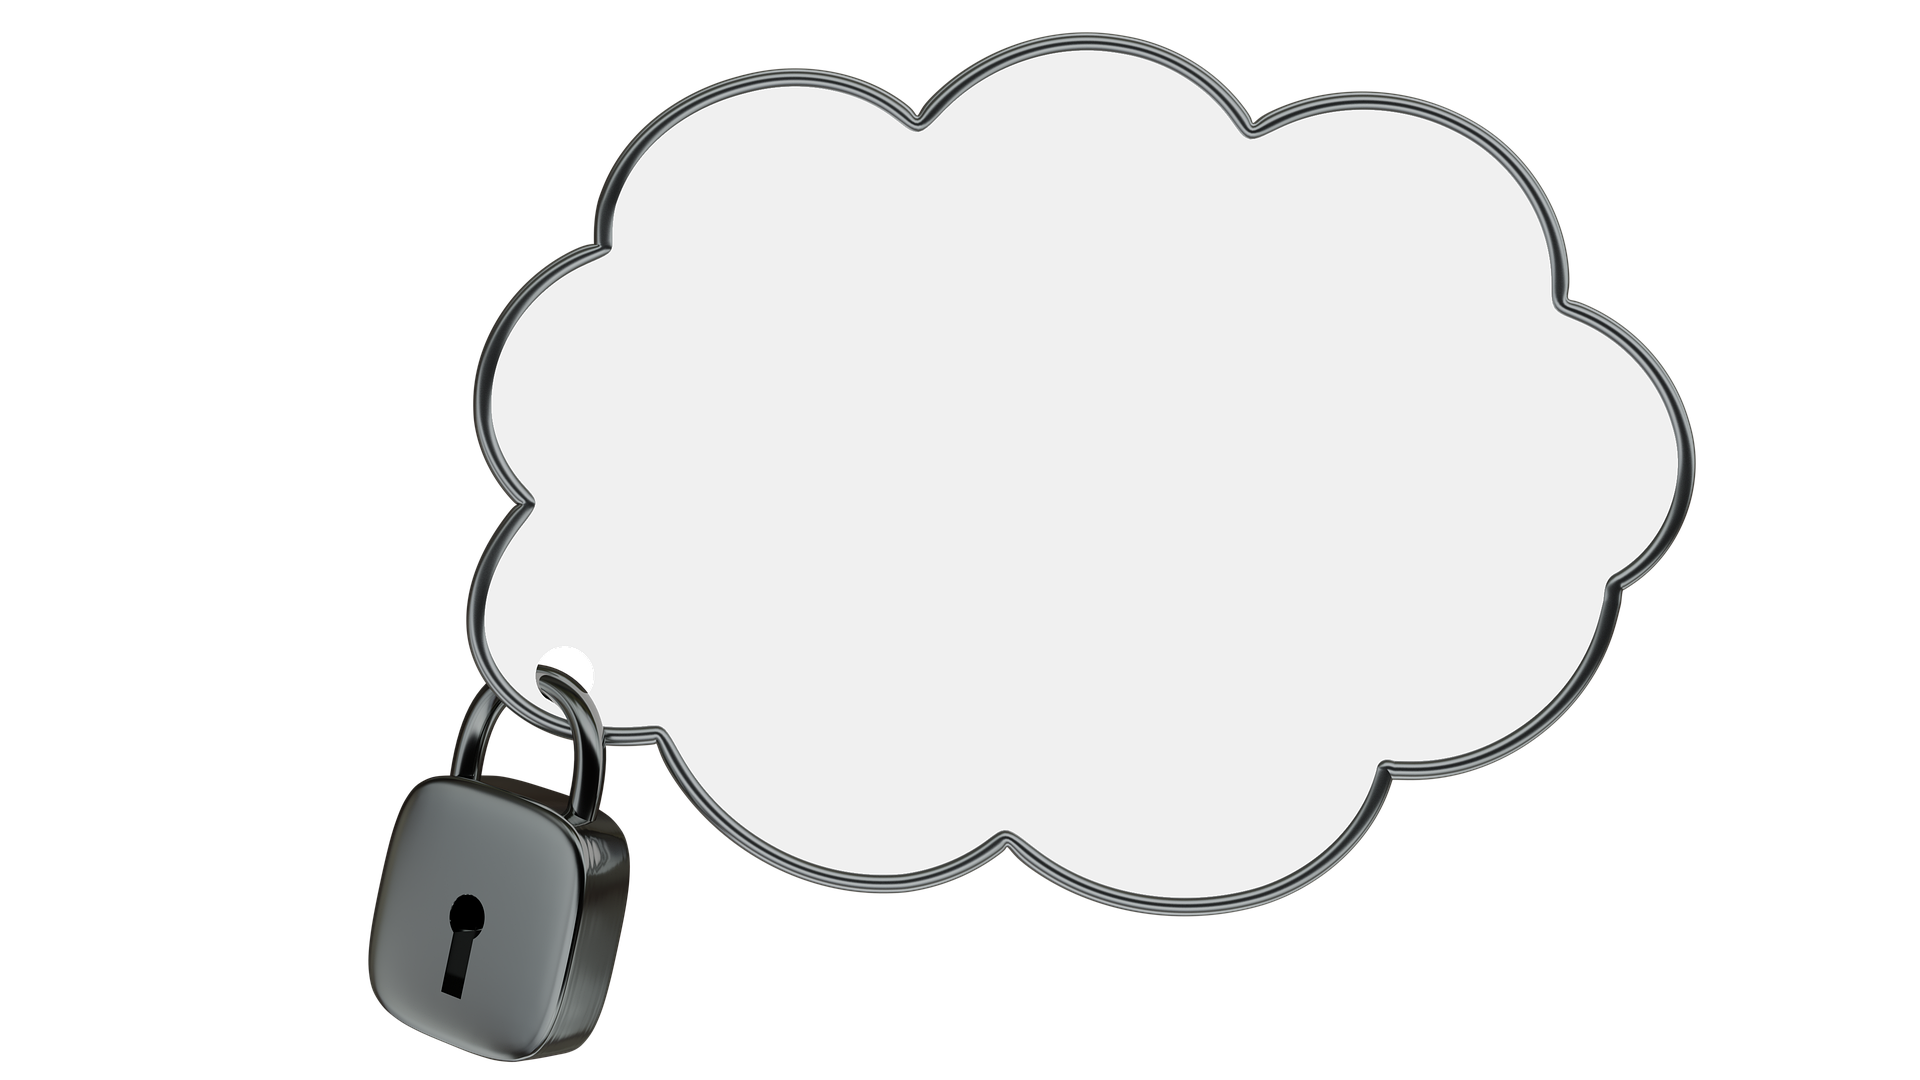 Single sign-on (SSO) for the cloud